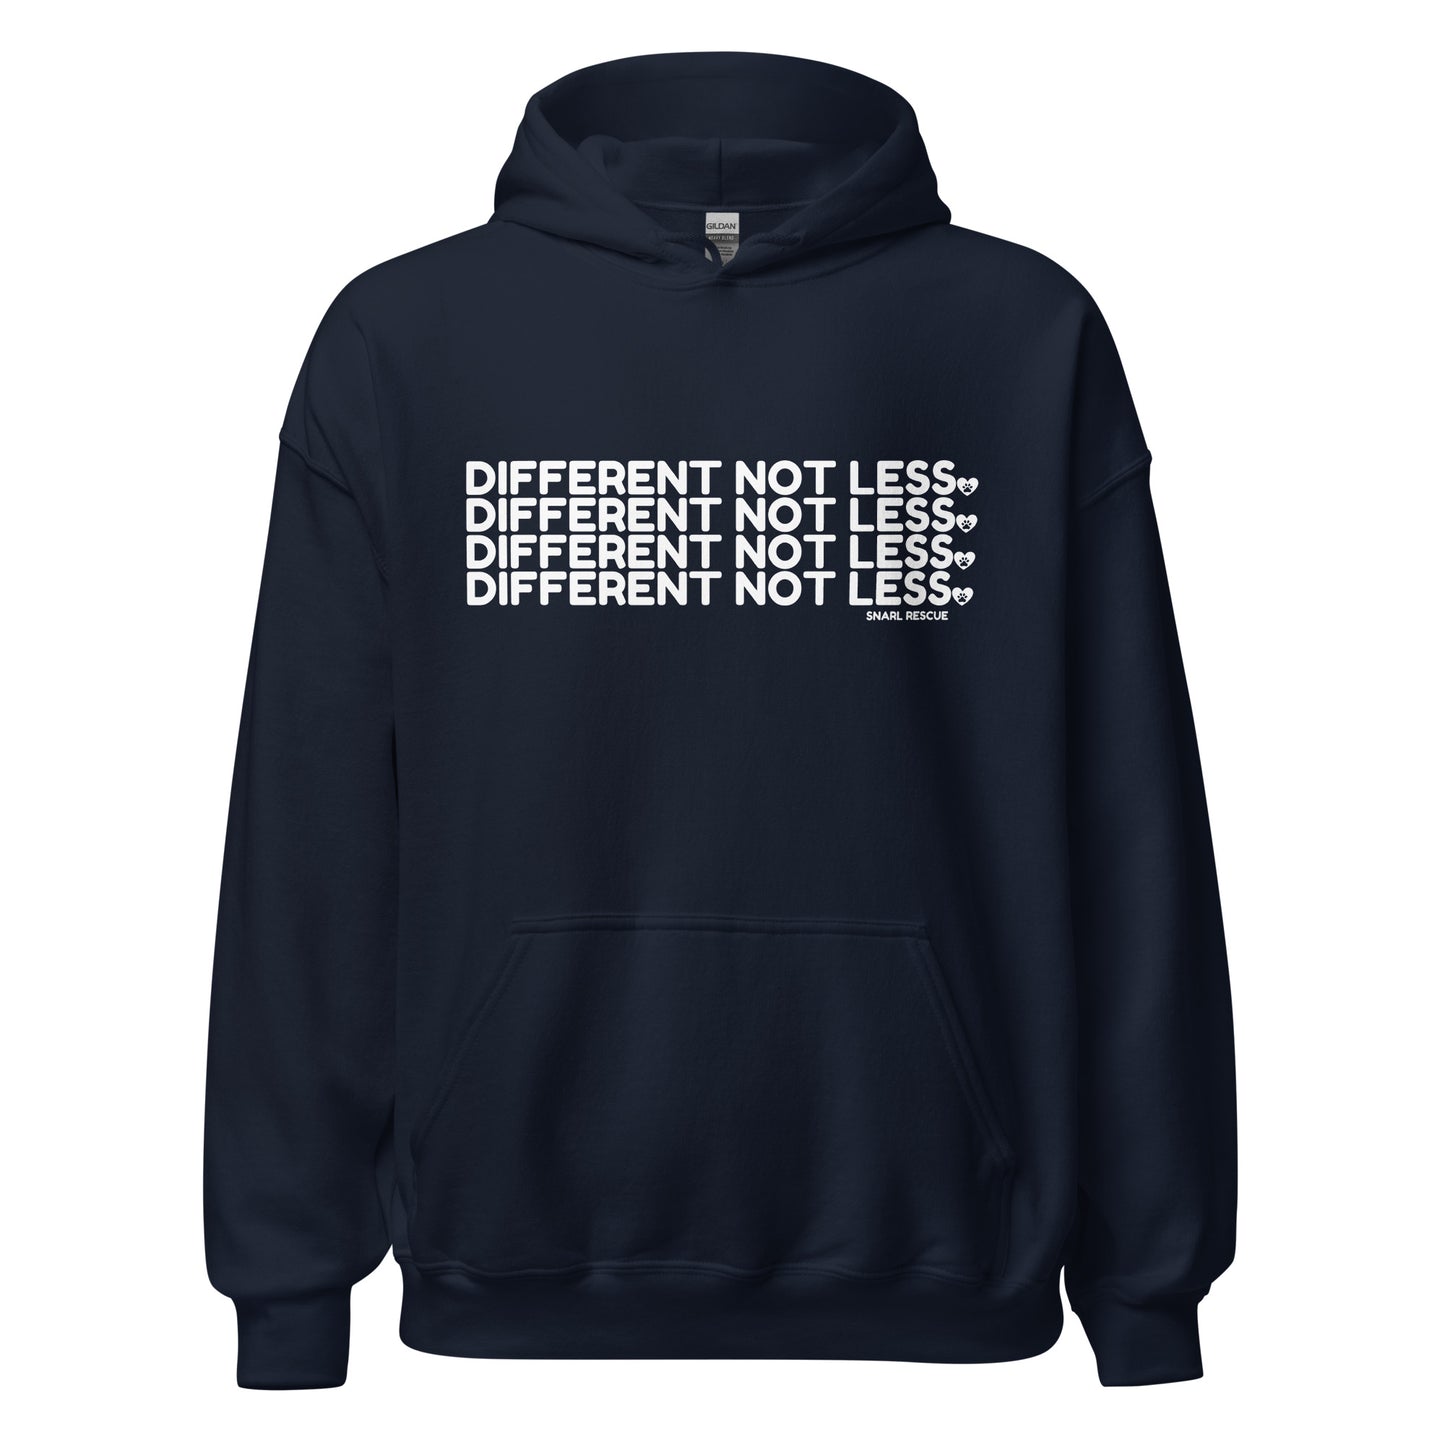 The "Different Not Less" Stacked Hoodie